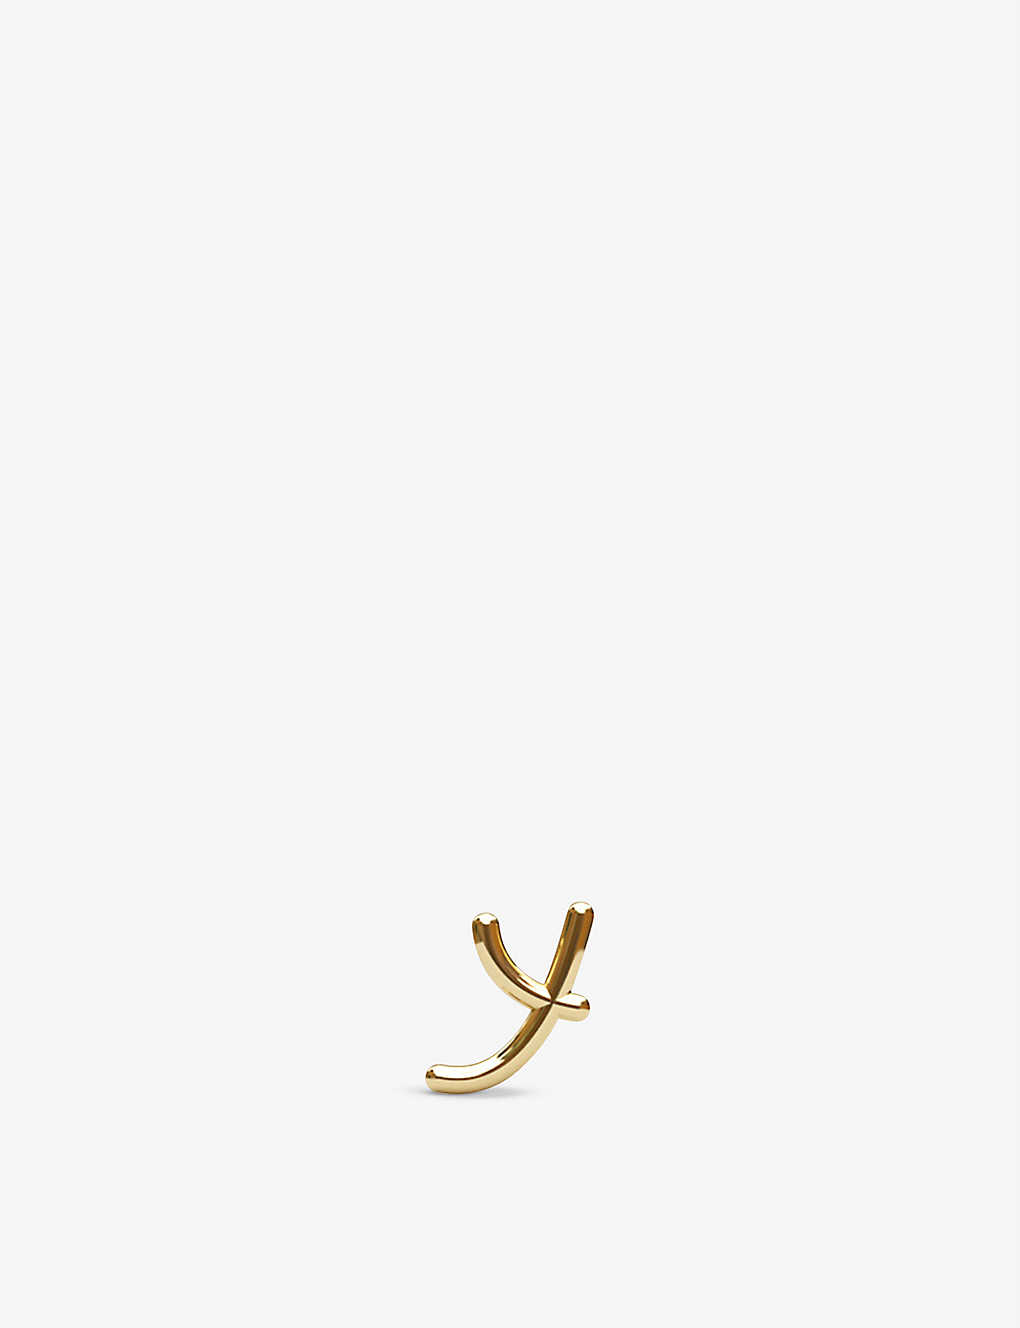 THE ALKEMISTRY THE ALKEMISTRY WOMEN'S 18CT YELLOW GOLD LOVE LETTER Y INITIAL 18CT YELLOW GOLD SINGLE STUD EARRING,51774609